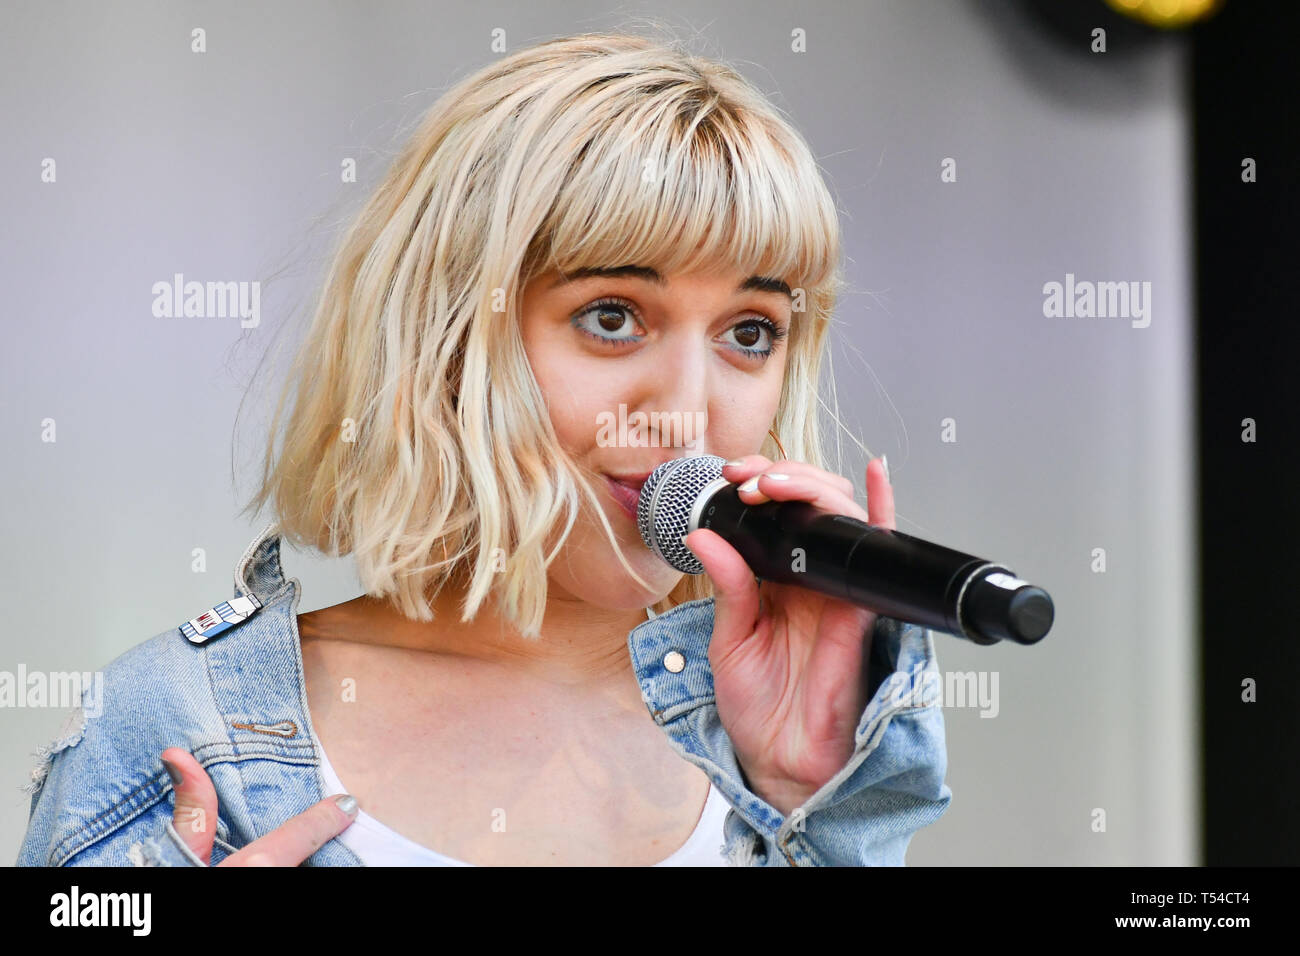 London, UK. 20th April, 2019.London, UK. 20th April, 2019. Basking in London - Jazz Mino performs at the Feast of St George to celebrate English culture with music and English food stalls in Trafalgar Square on 20 April 2019, London, UK. Credit: Picture Capital/Alamy Live News Credit: Picture Capital/Alamy Live News Credit: Picture Capital/Alamy Live News Stock Photo